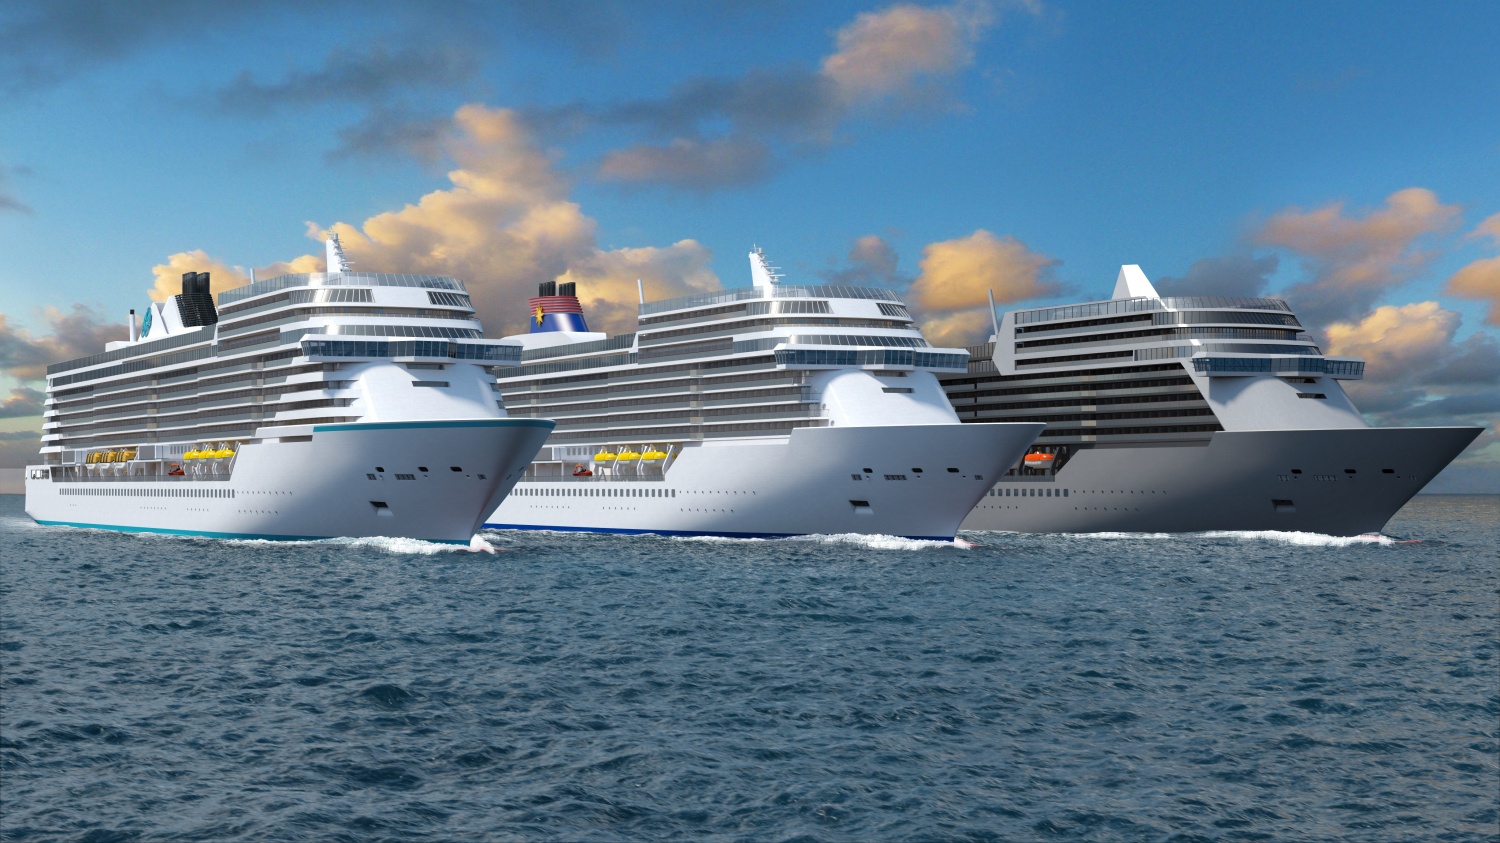 MV Werften Lays Keel for 2nd Global Class Ship for Dream Cruises, Eyes Construction of Universal Class Ships